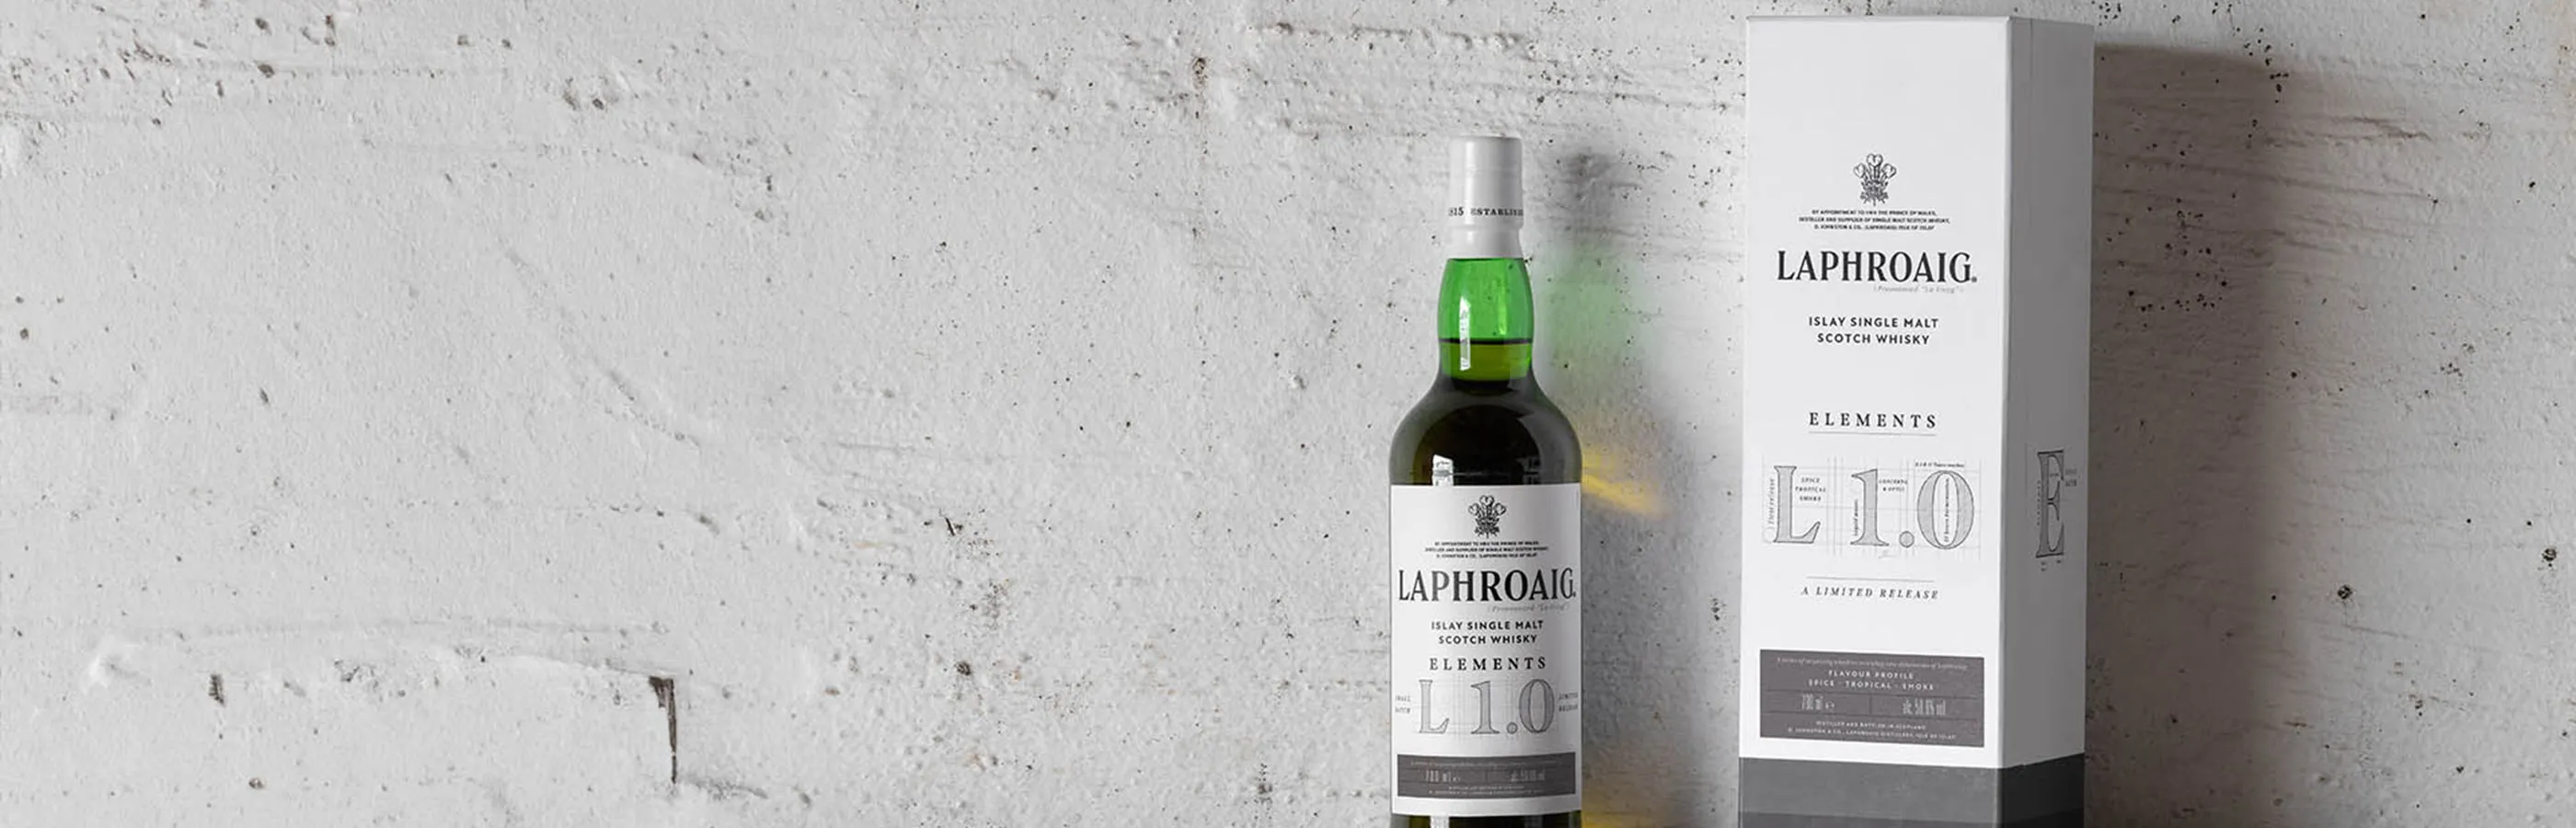 Laphroaig® debuts the Elements series, revealing a new and unexpected side to Islay’s most characterful whisky